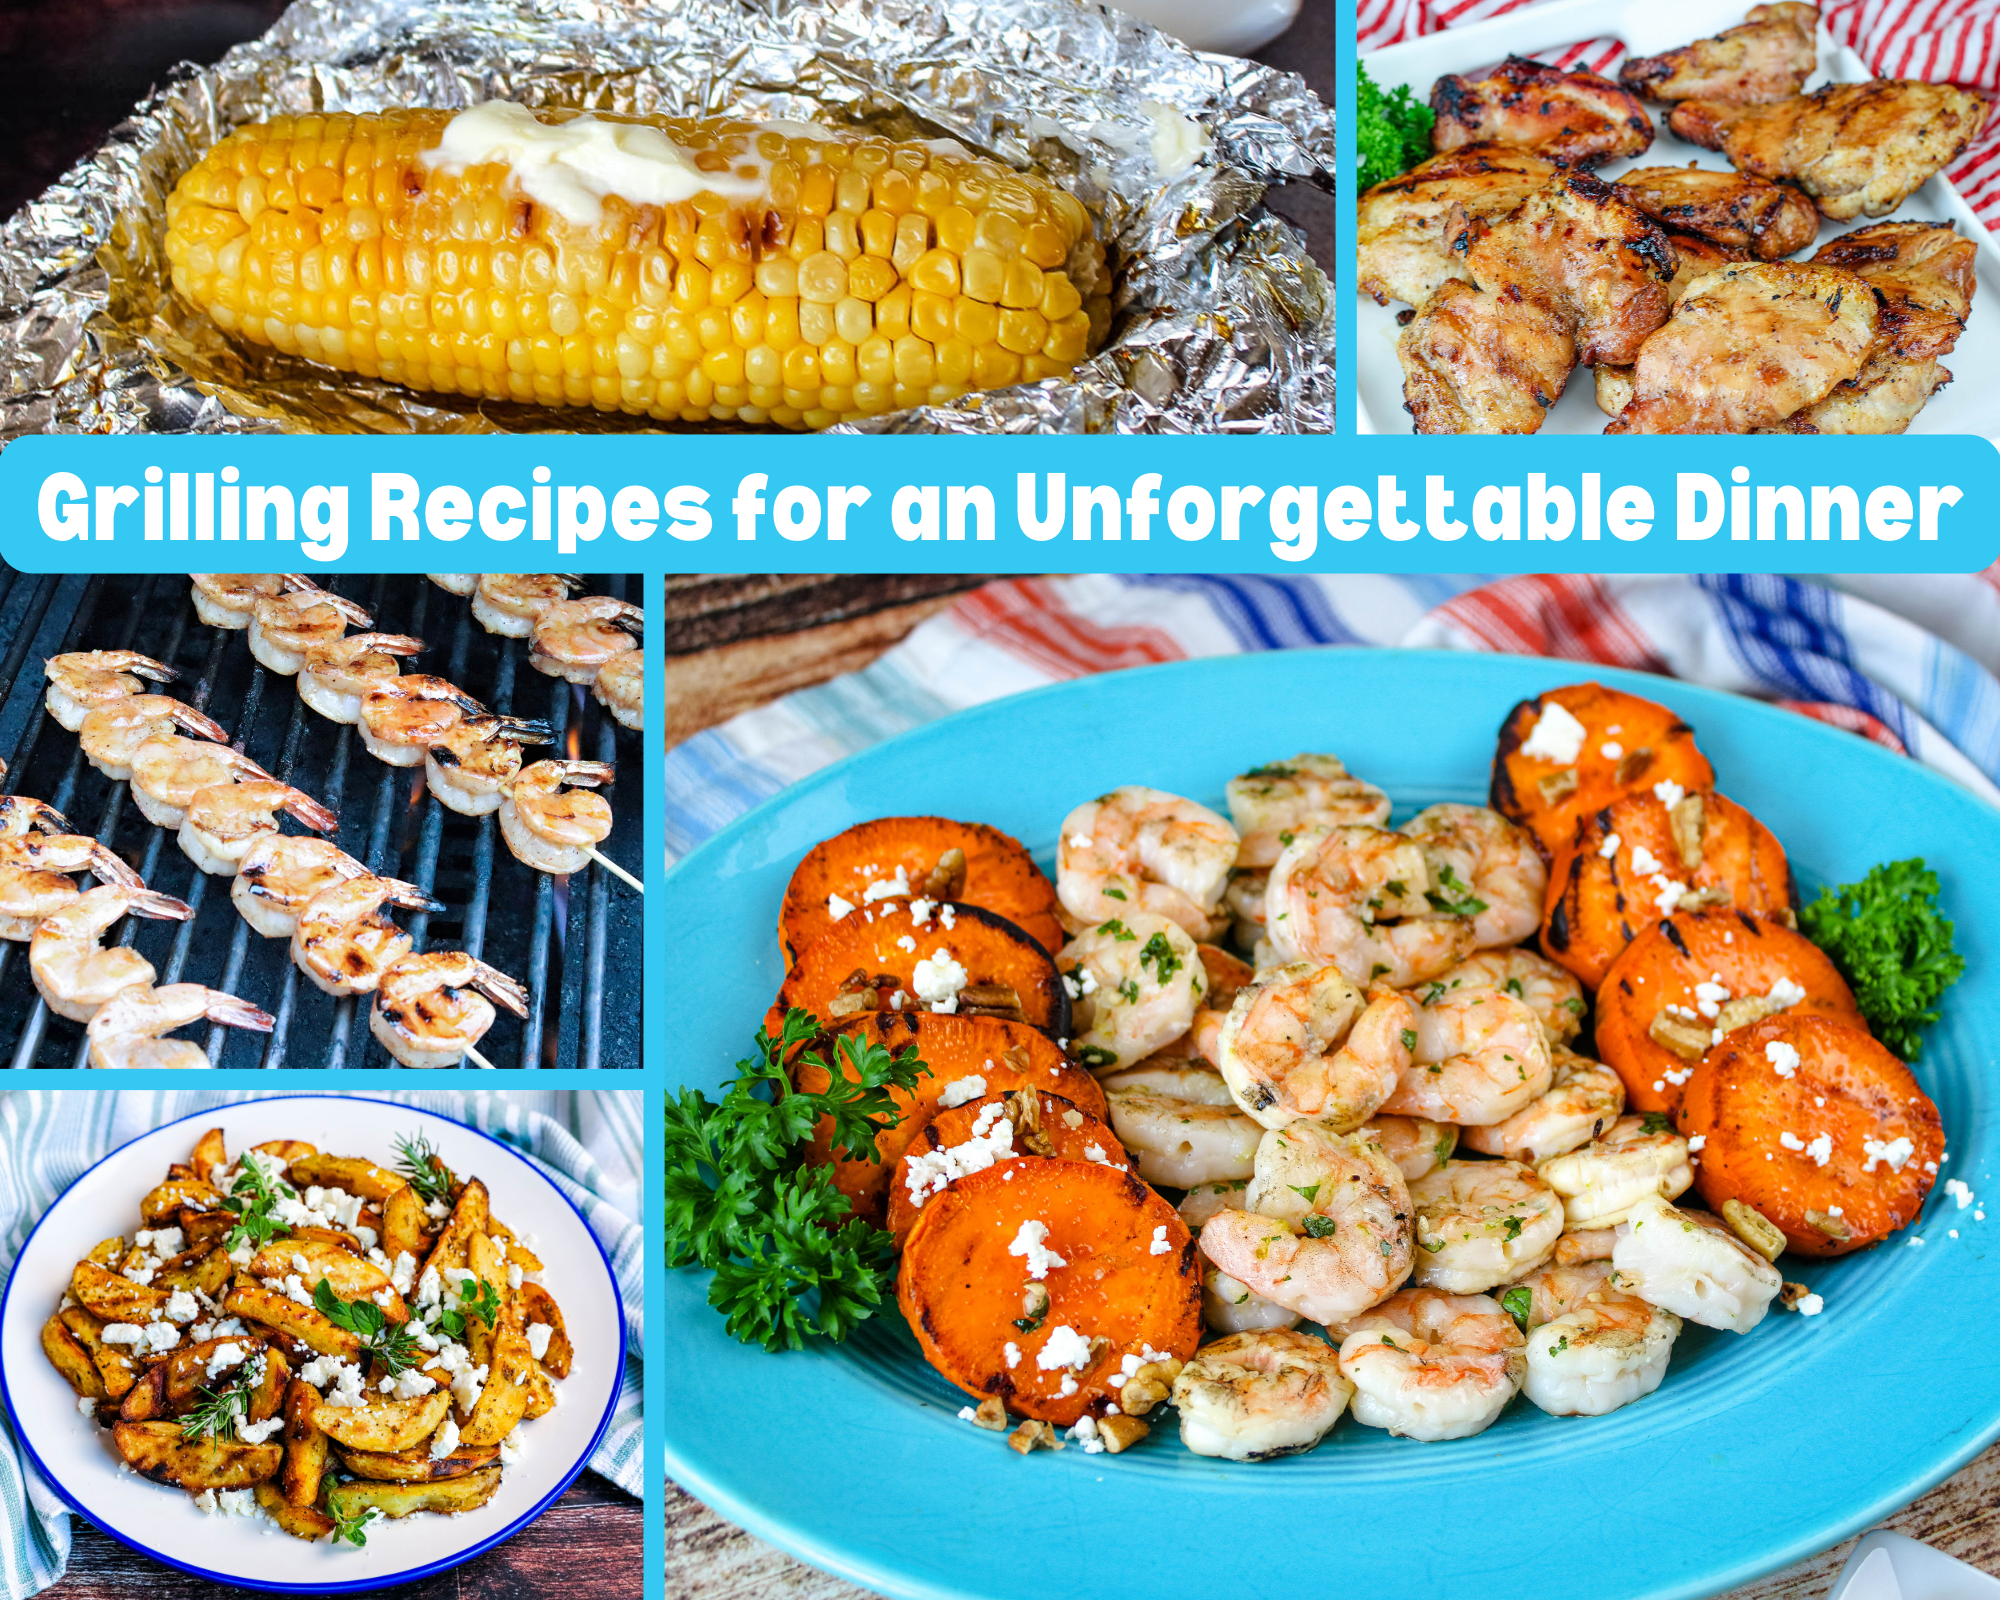 Grilling Recipes for an Unforgettable Dinner